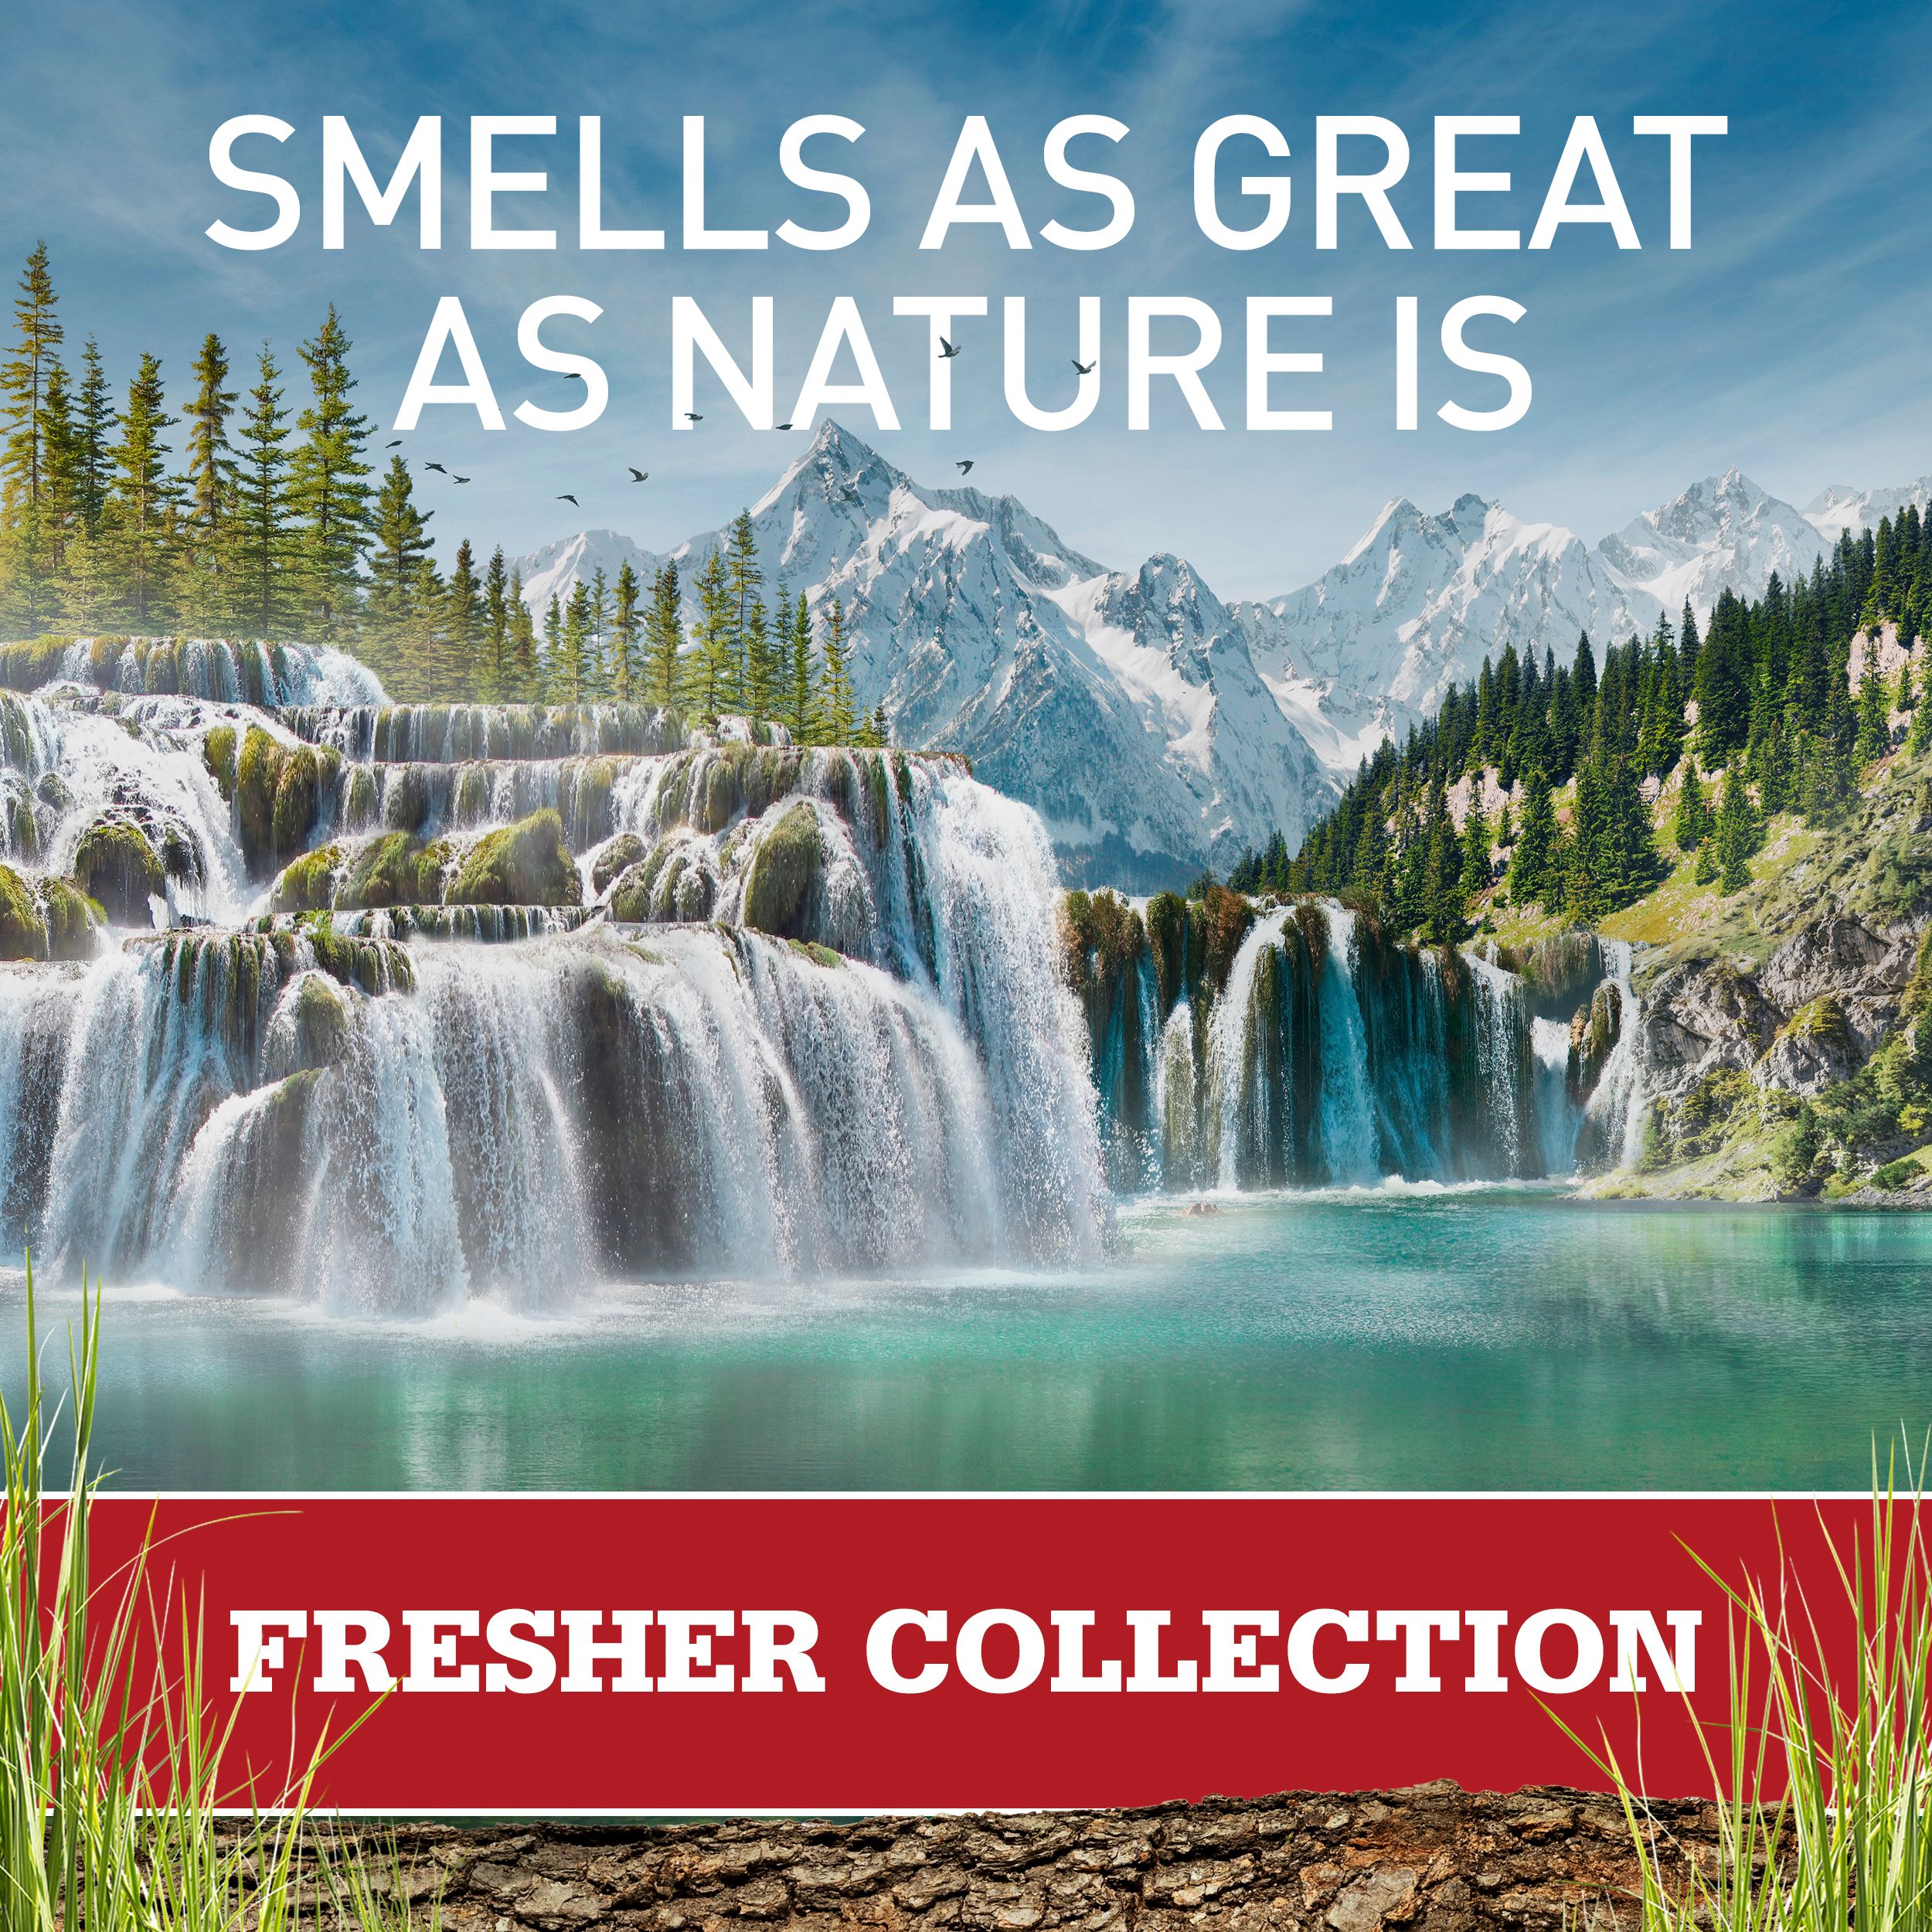 Old Spice Fresh Collection Denali Antiperspirant and Deodorant 2.6 oz Twin - image 3 of 6